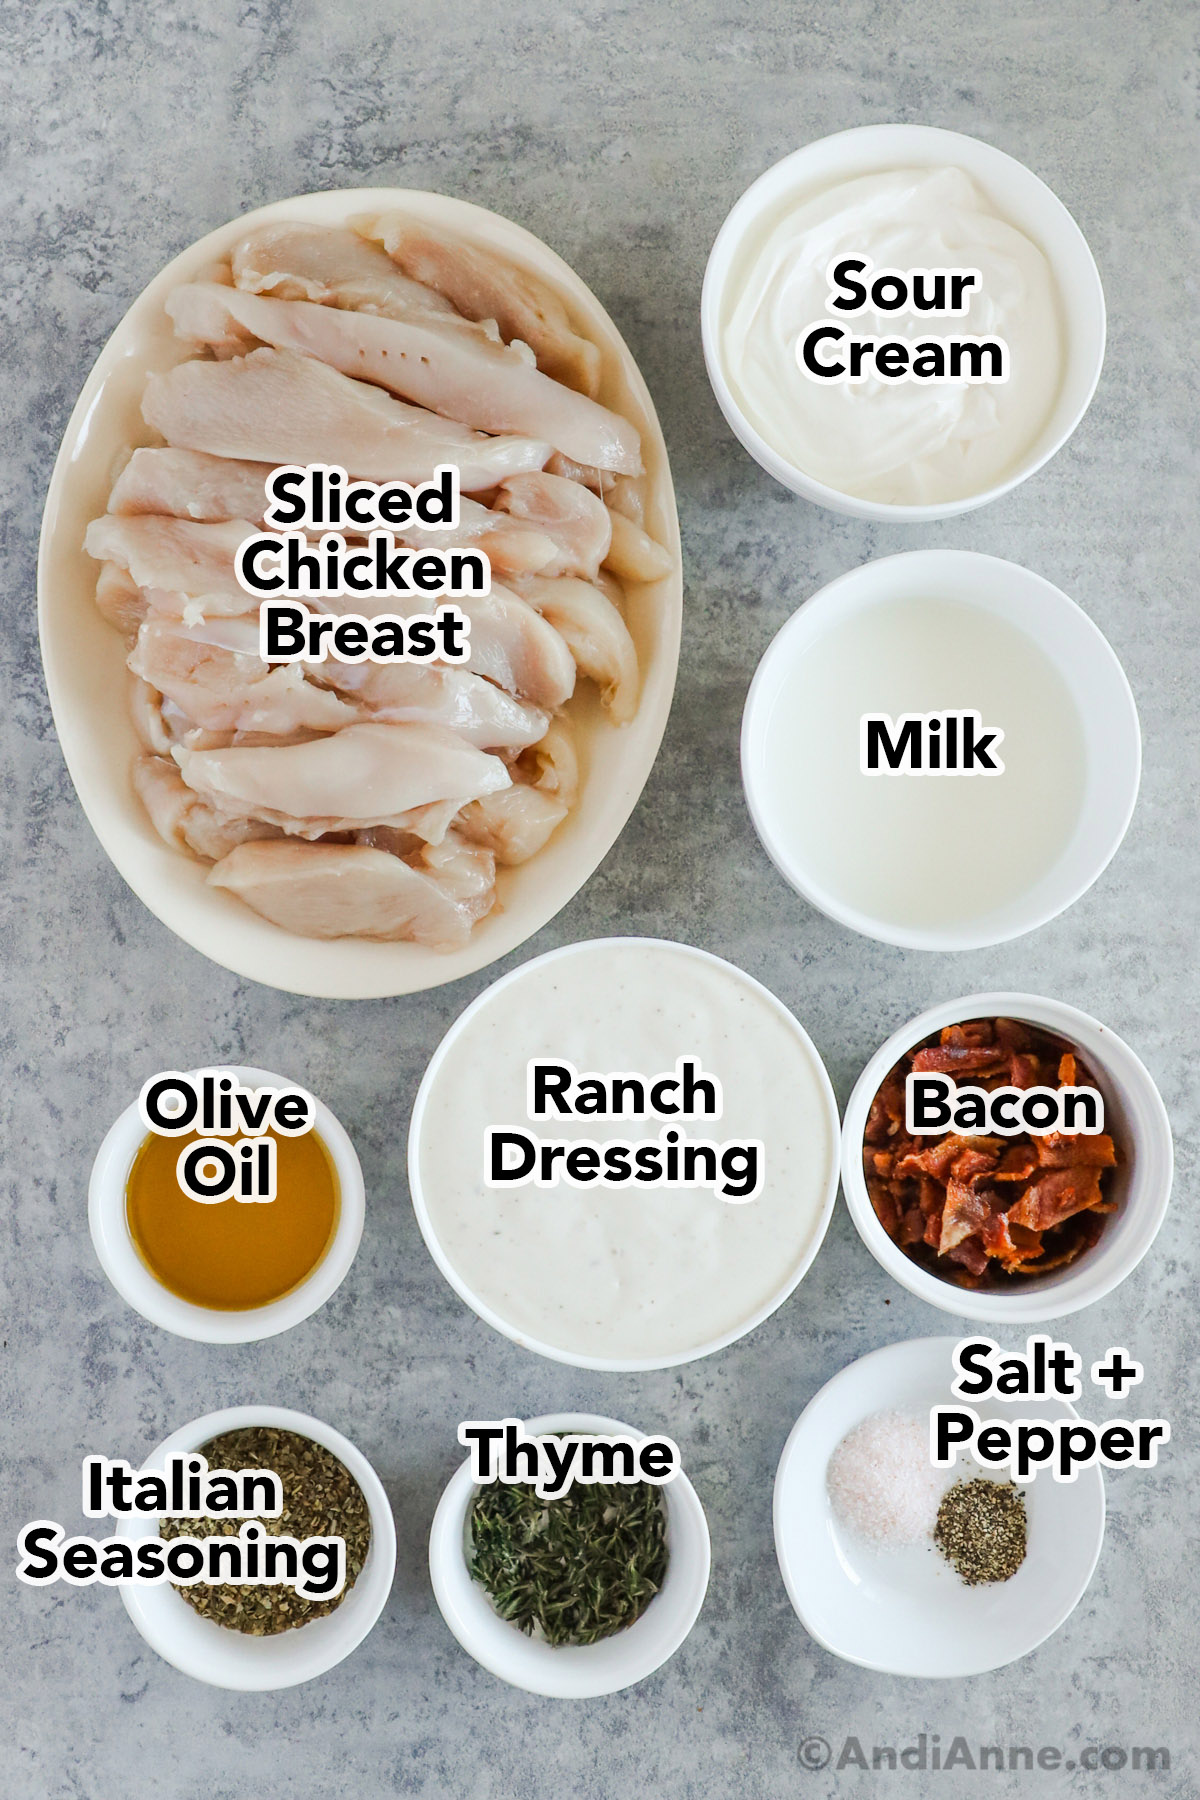 Recipe ingredients in bowls including sliced chicken, sour cream, milk, olive oil, ranch dressing, crumbled bacon, italian seasoning, thyme, salt and pepper.